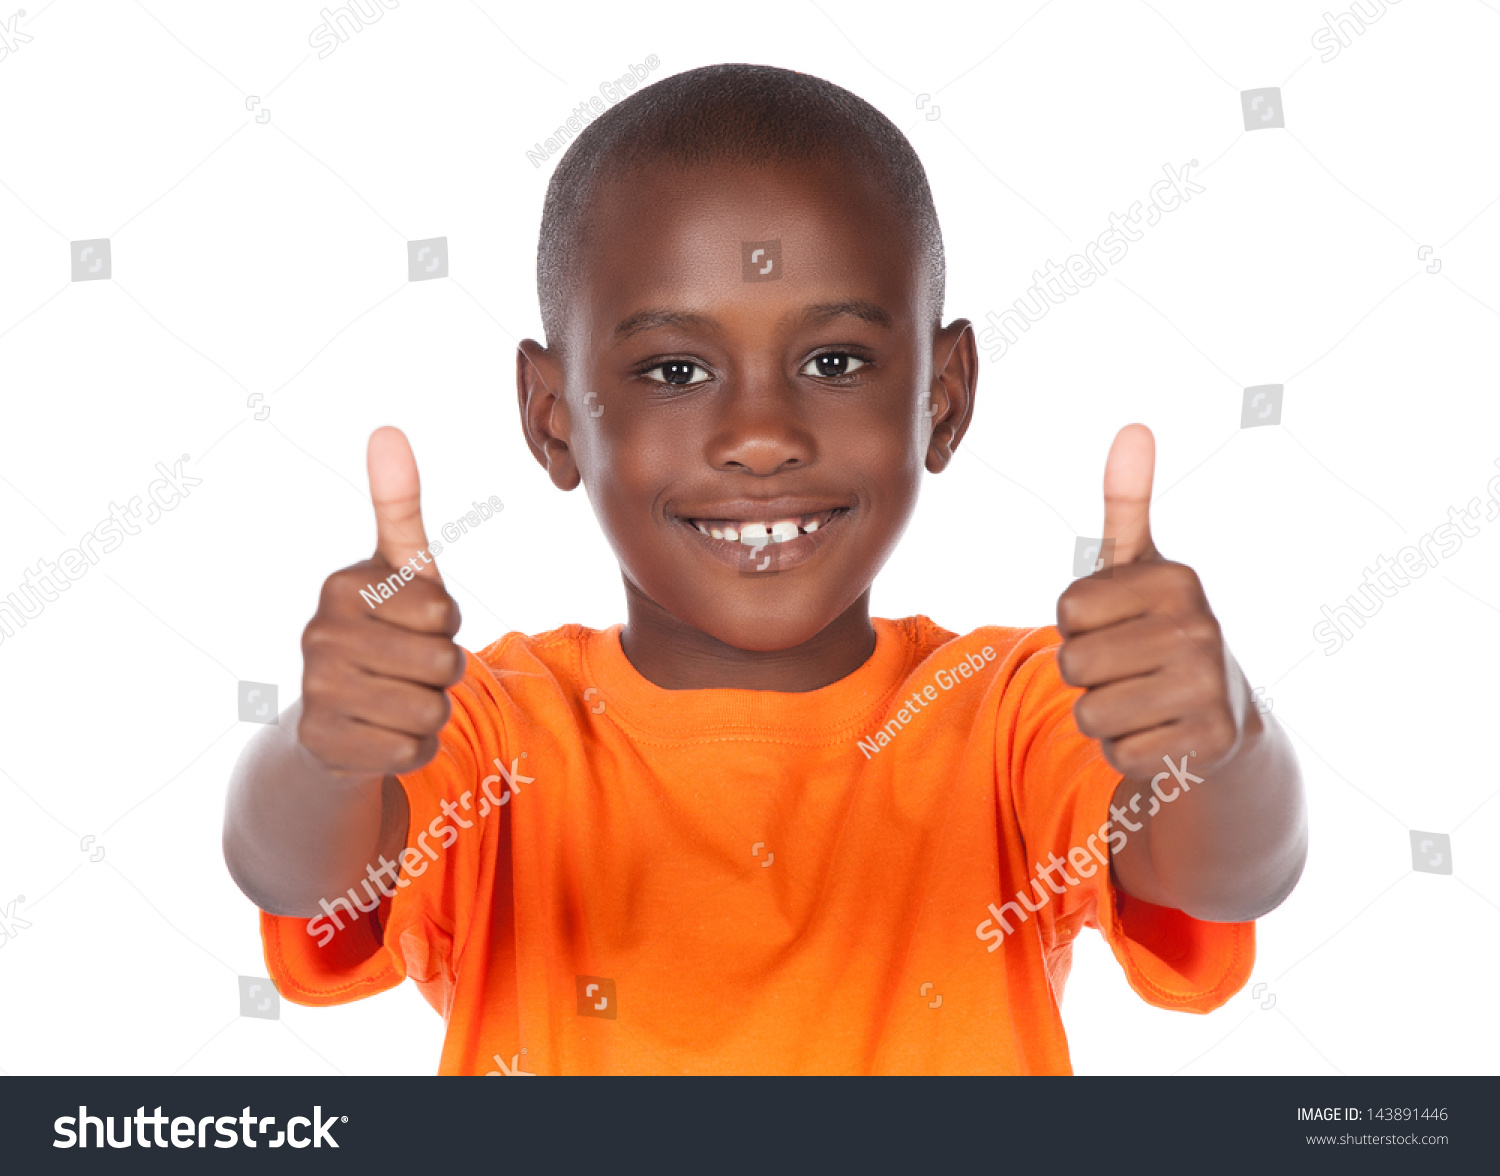 Cute African Boy Wearing A Bright Orange T-Shirt. The Boy Is Showing A ...